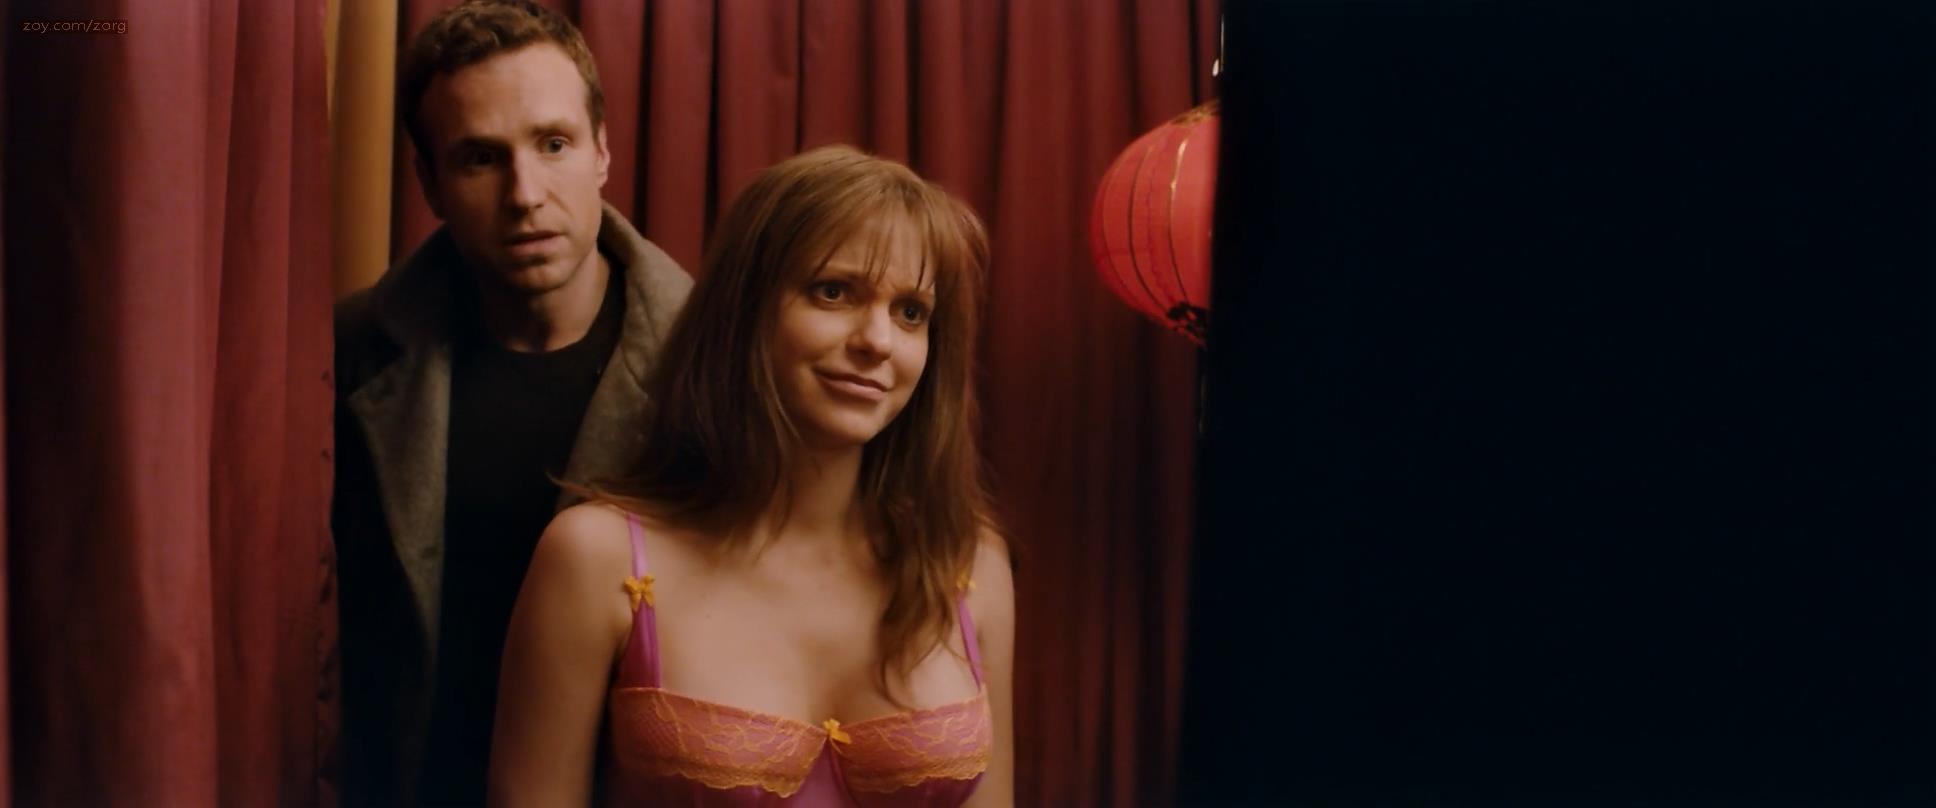 Anna Faris sexy in lingerie and Djalenga Scott hot in lingerie too - I Give It a Year (2013) hd1080p